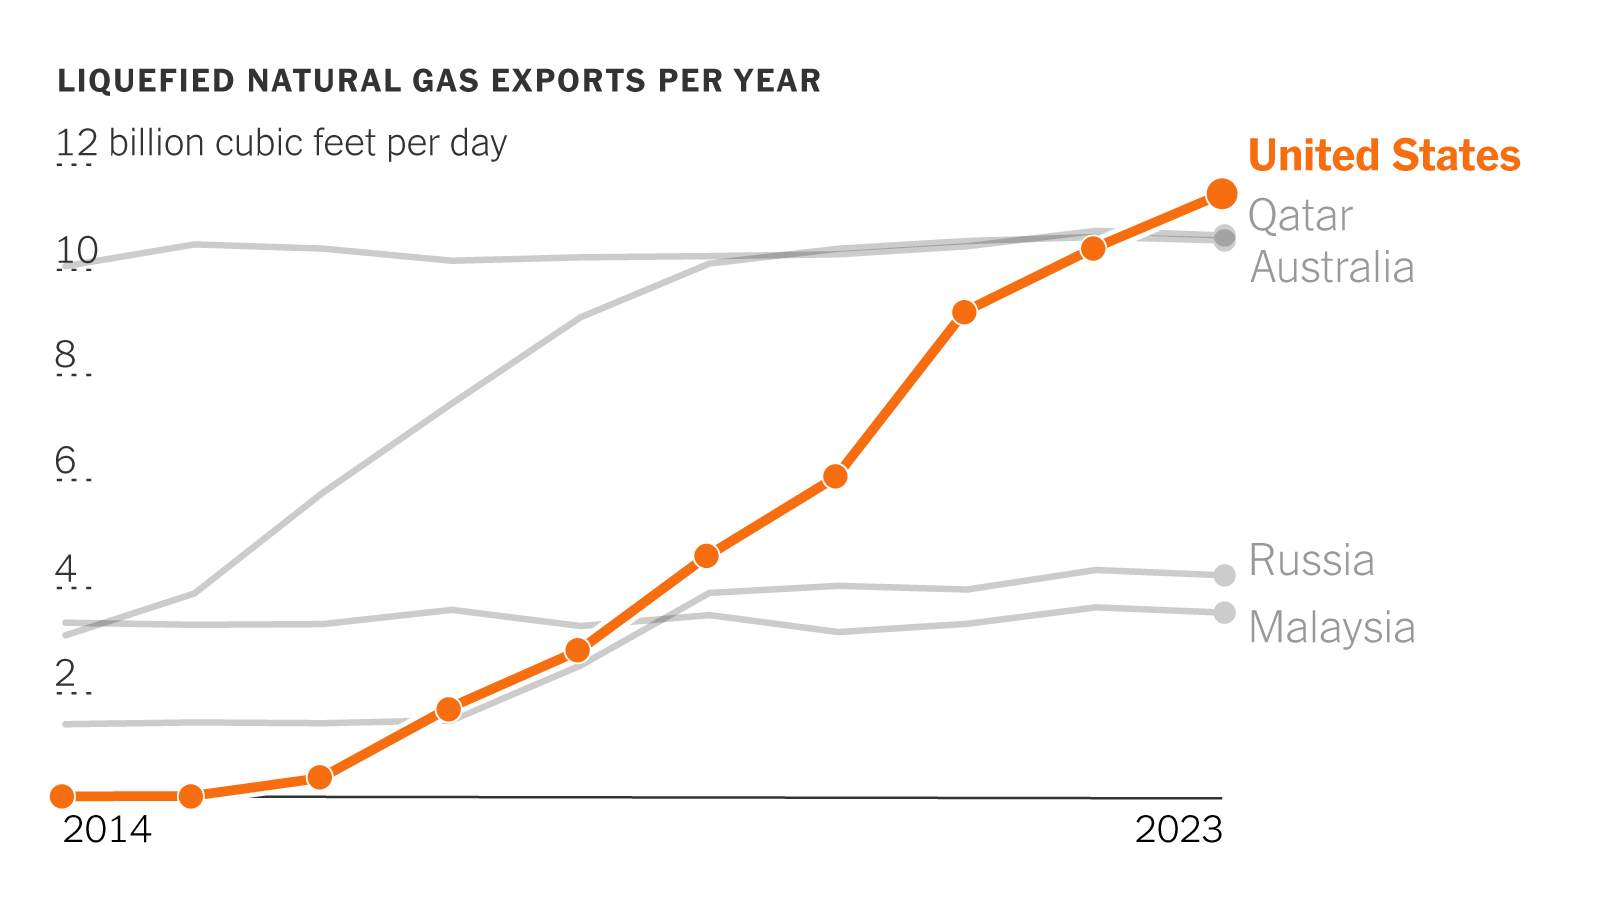 How the U.S. Became the World’s Biggest Natural Gas Supplier